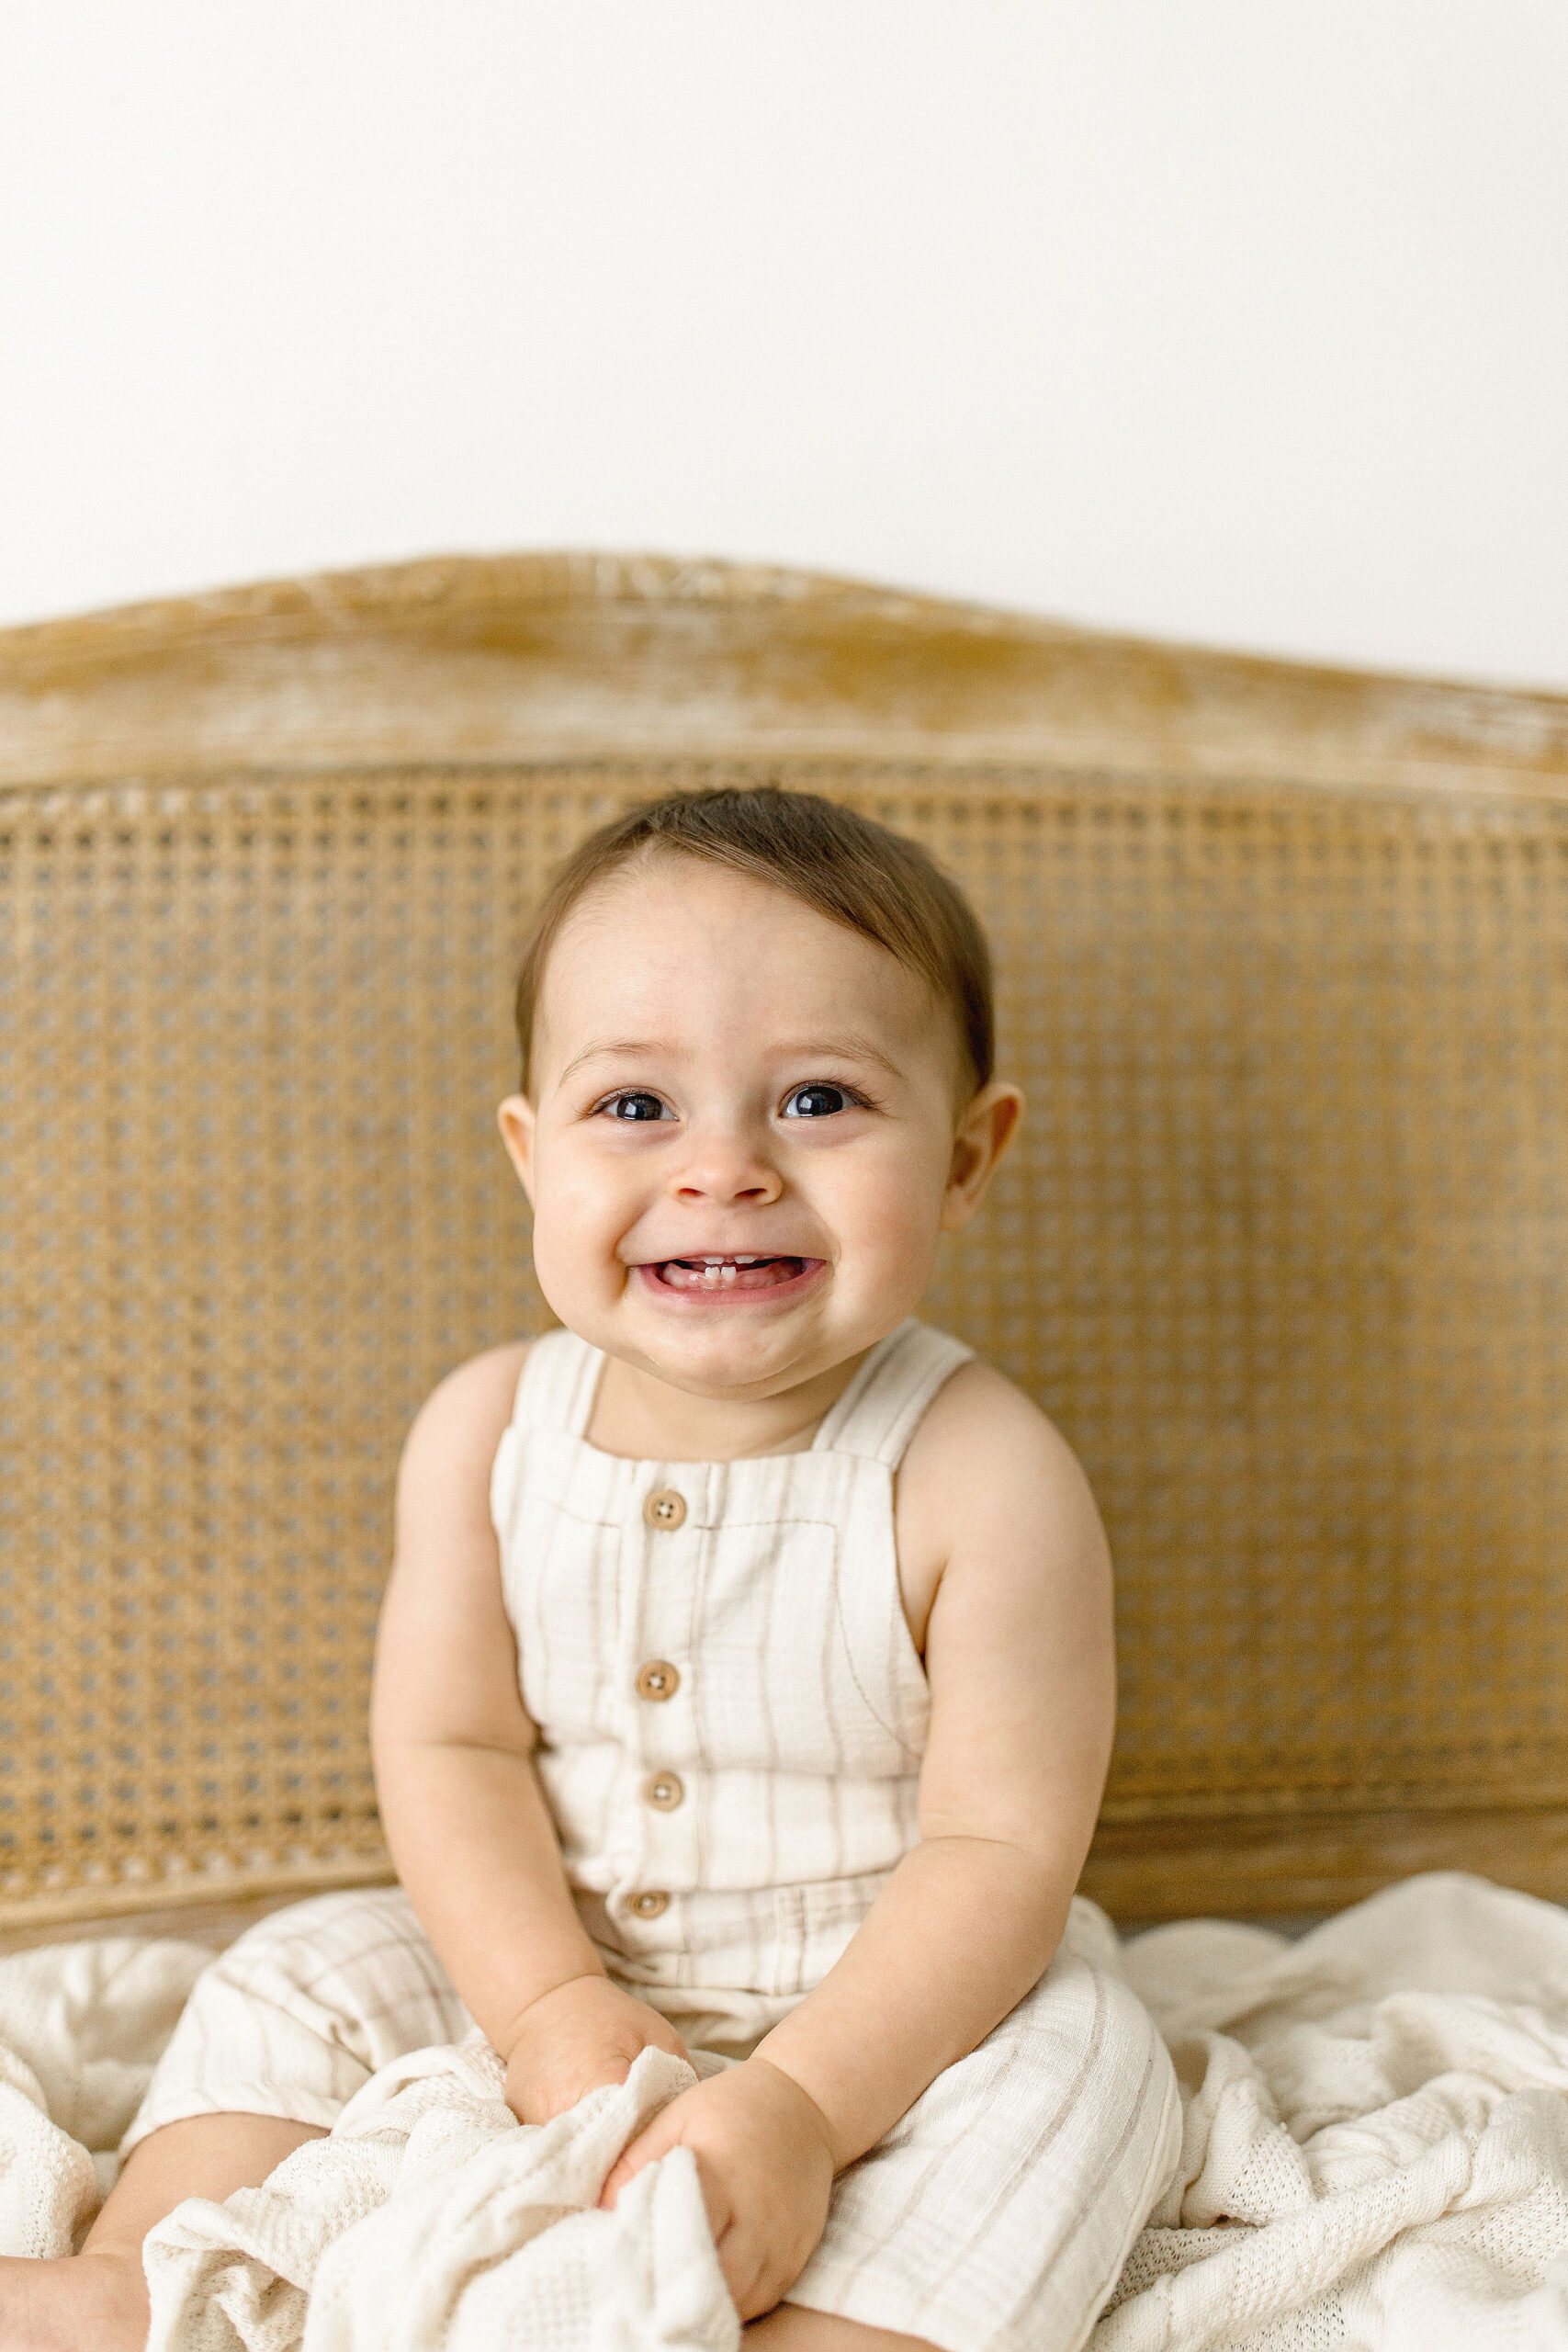 A toddler boy sits in tan overalls on a bed with a wicker headboard smiling miami toy stores